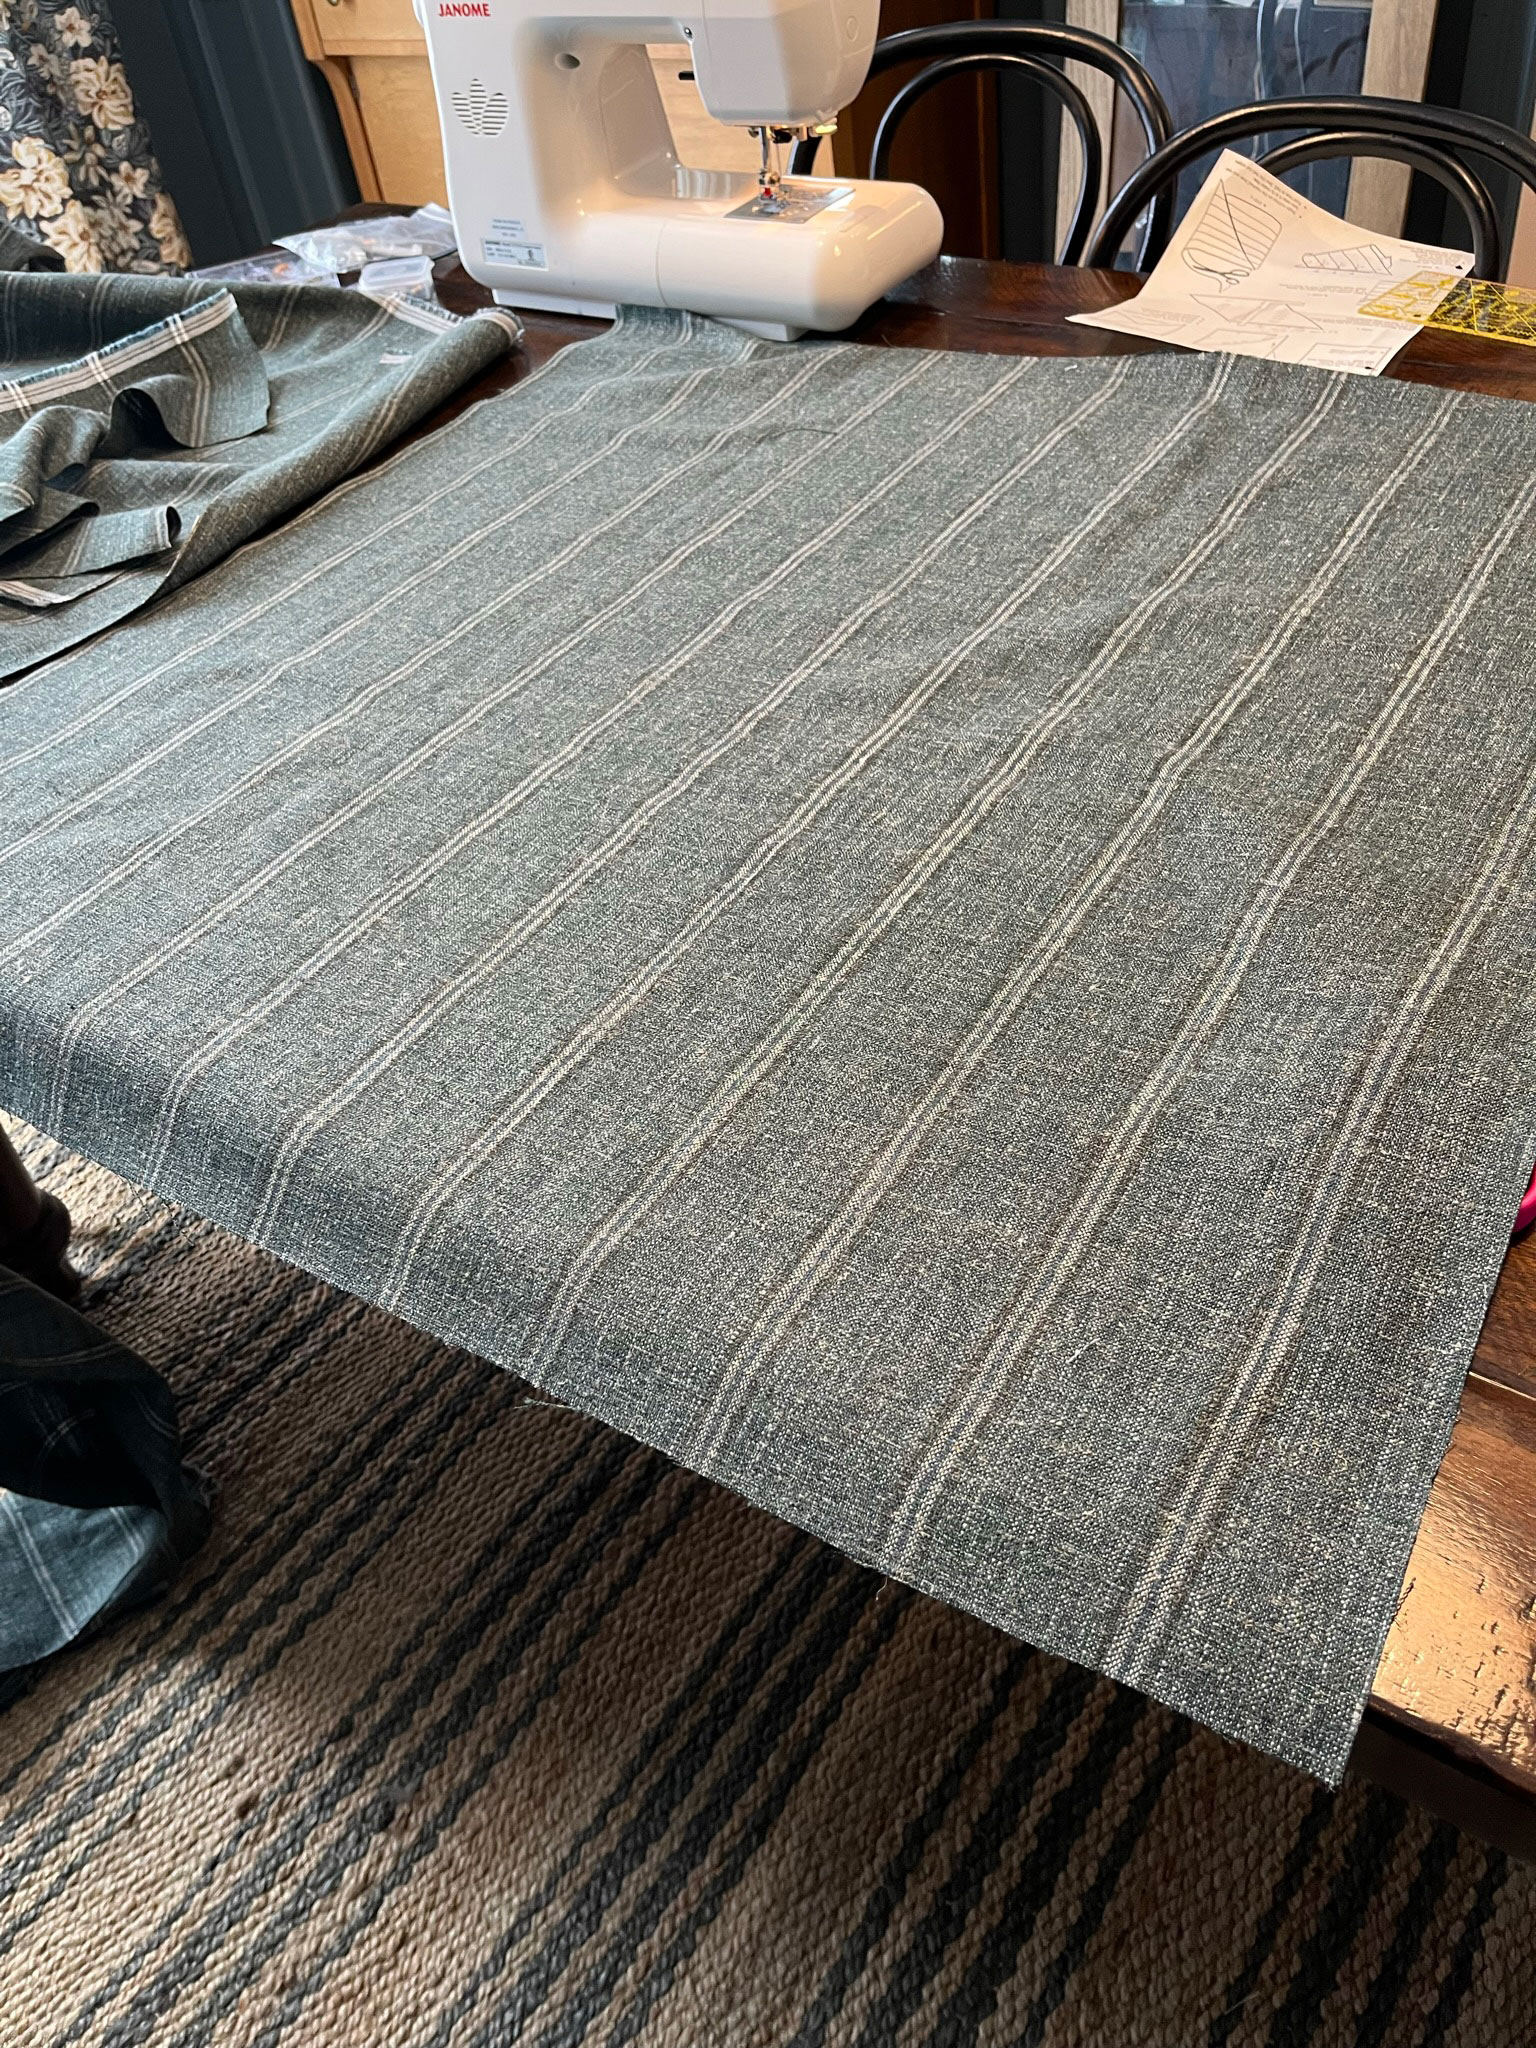 a square of fabric laying on a table